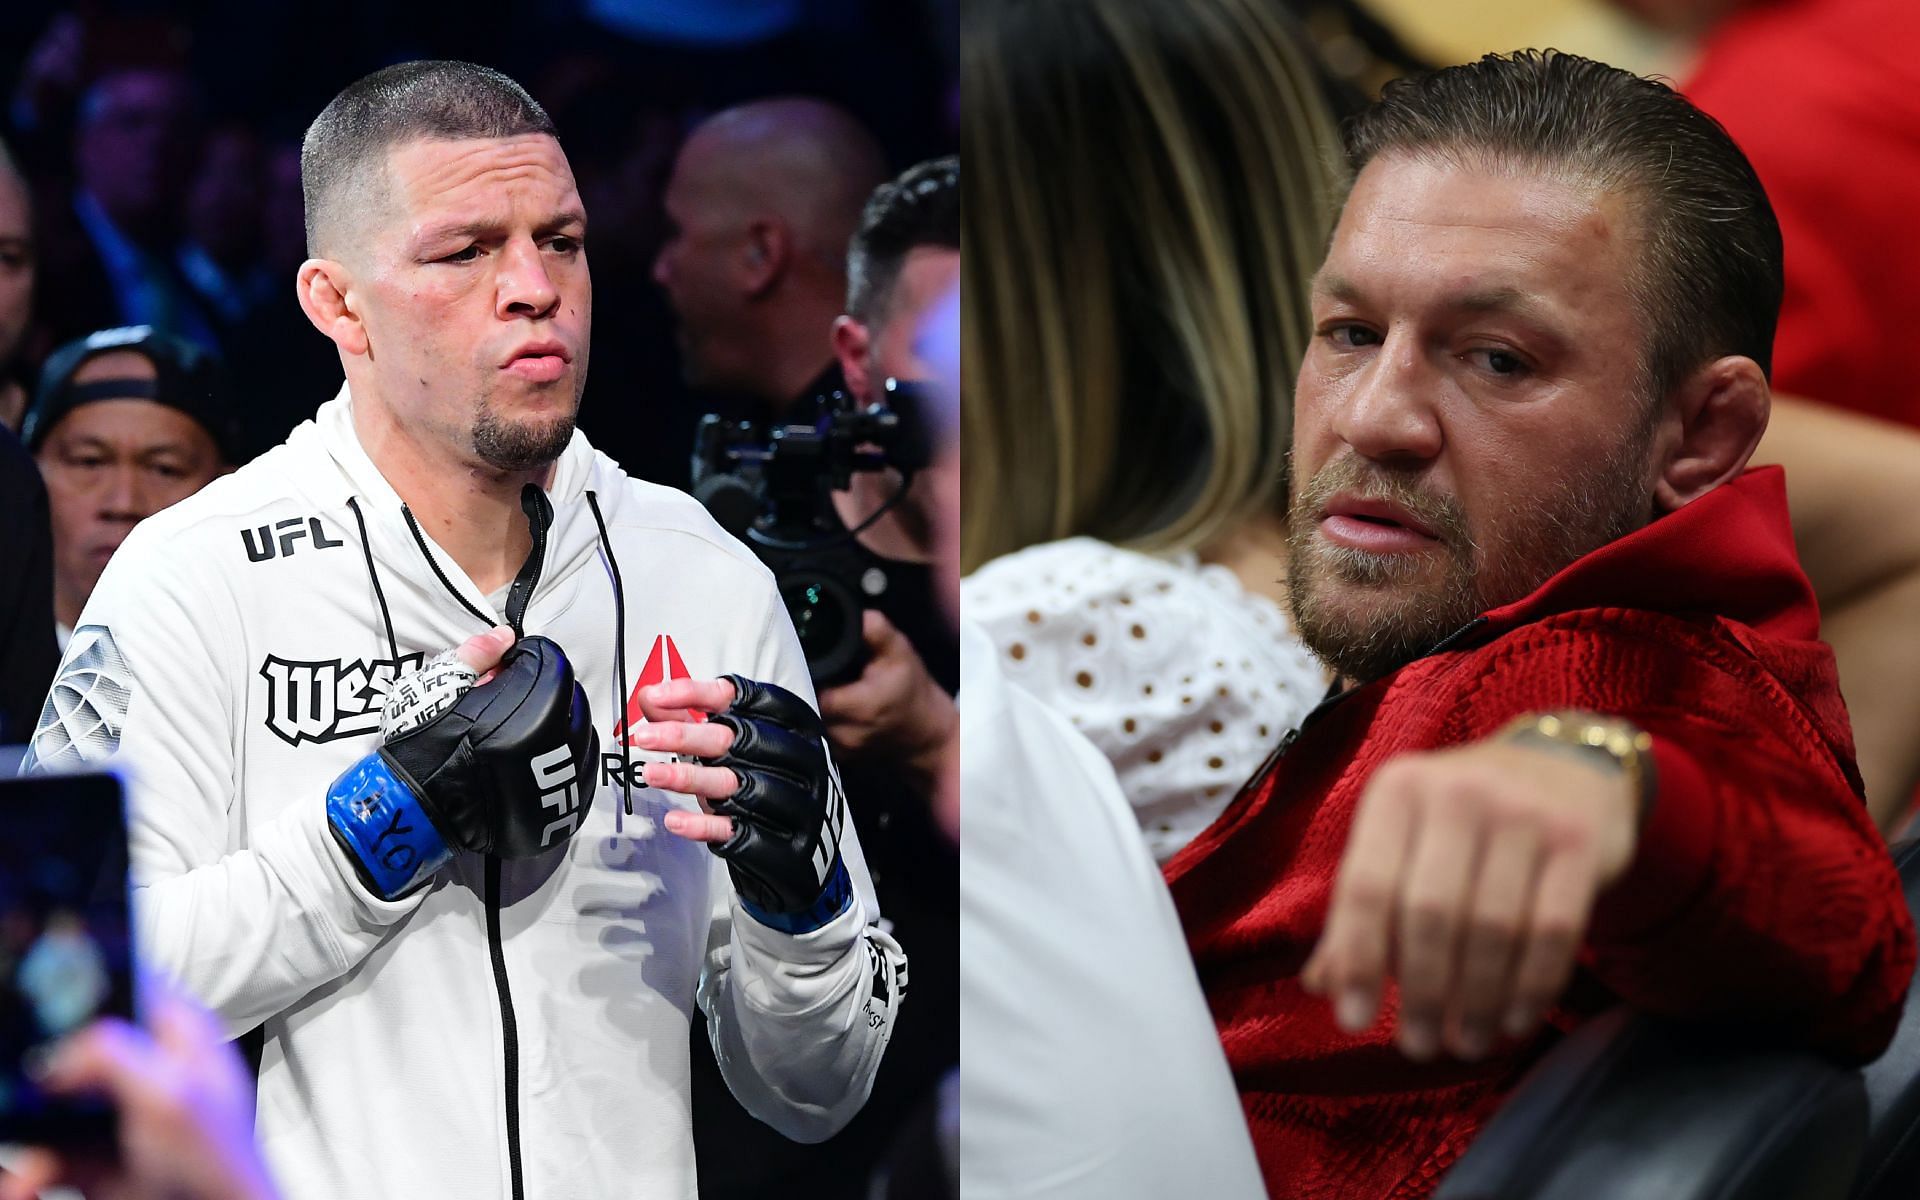 Conor McGregor and Nate Diaz [Image credits: Getty Images] 